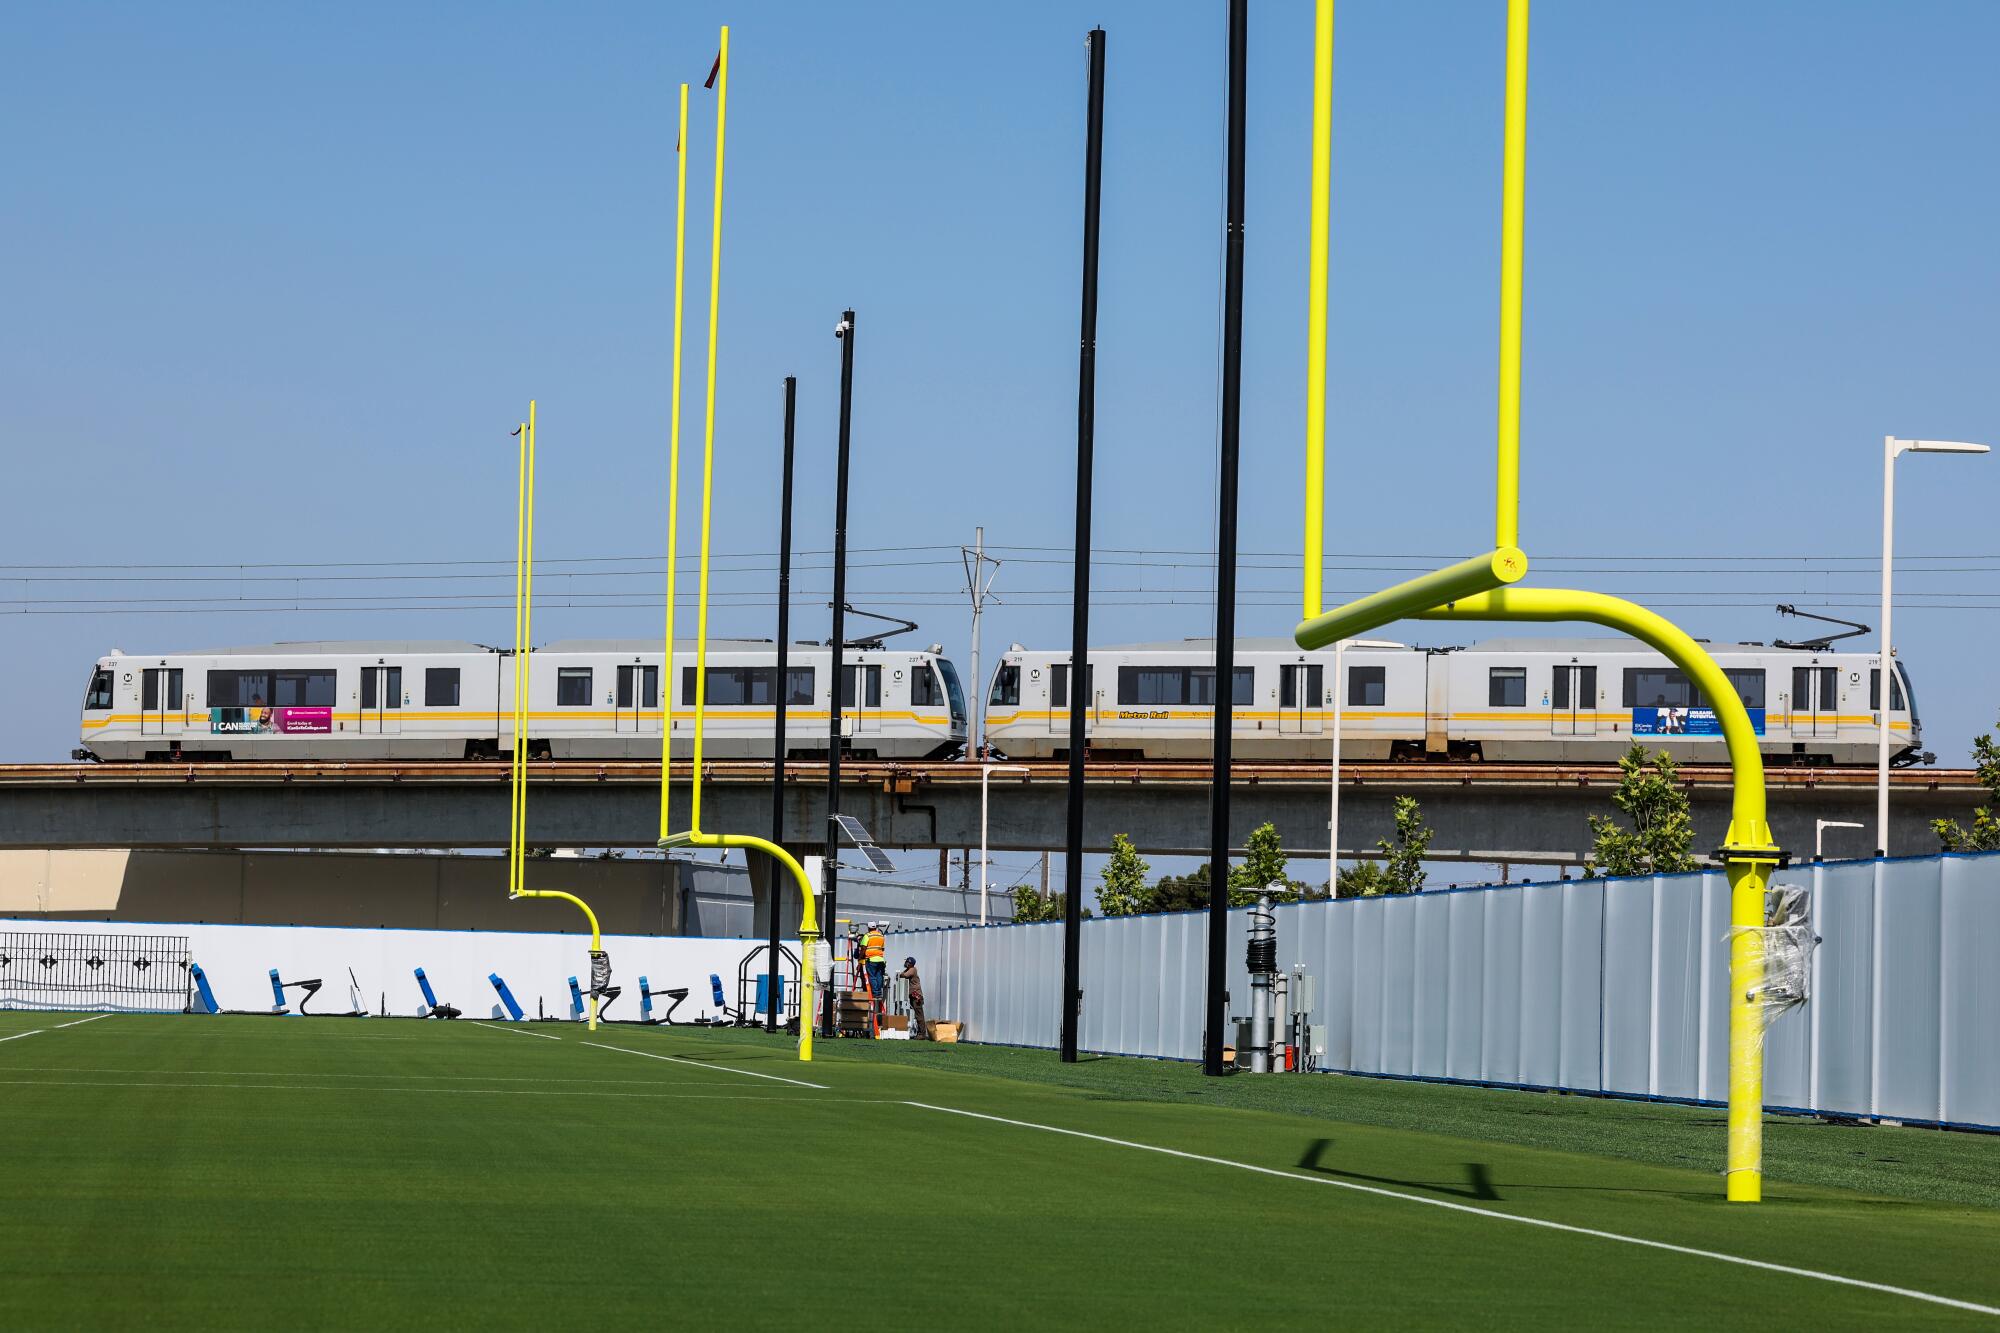 A train runs by the Chargers practice field.